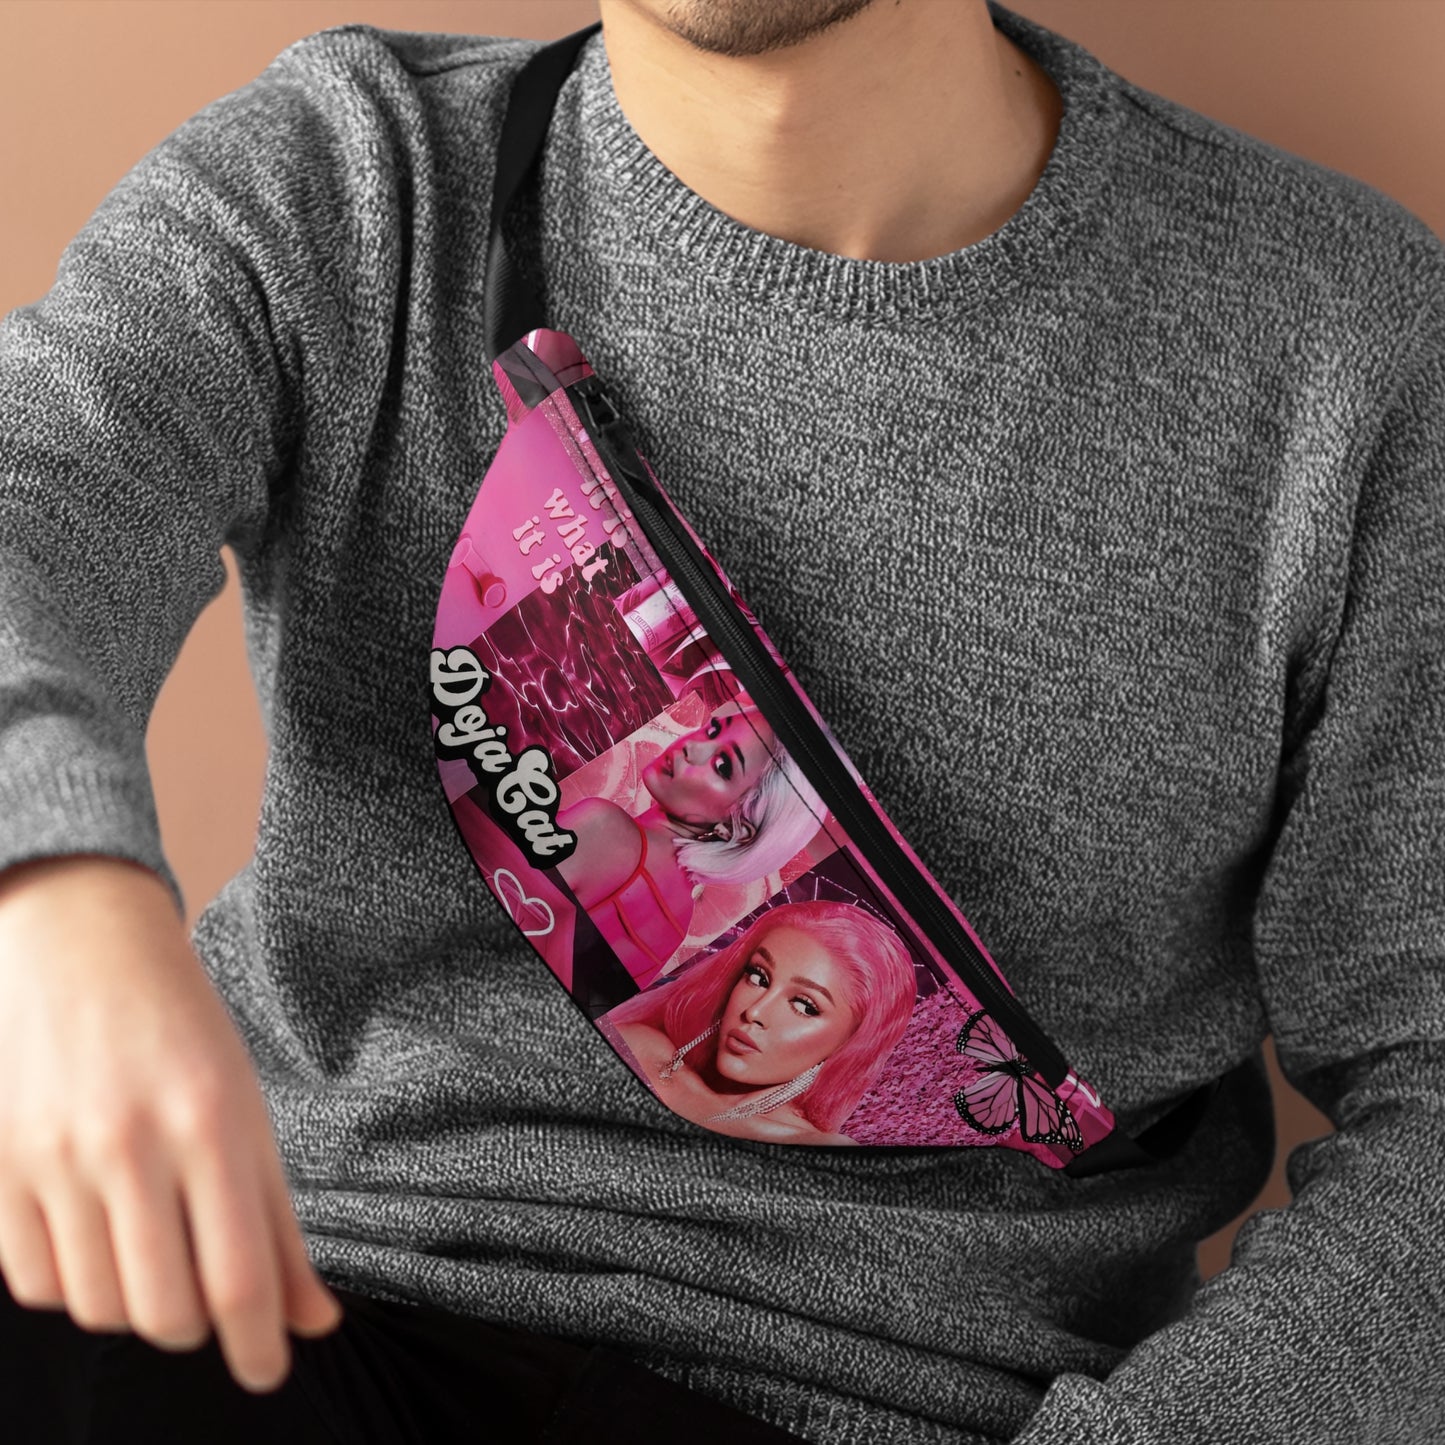 Doja Cat Pink Vibes Collage Fanny Pack